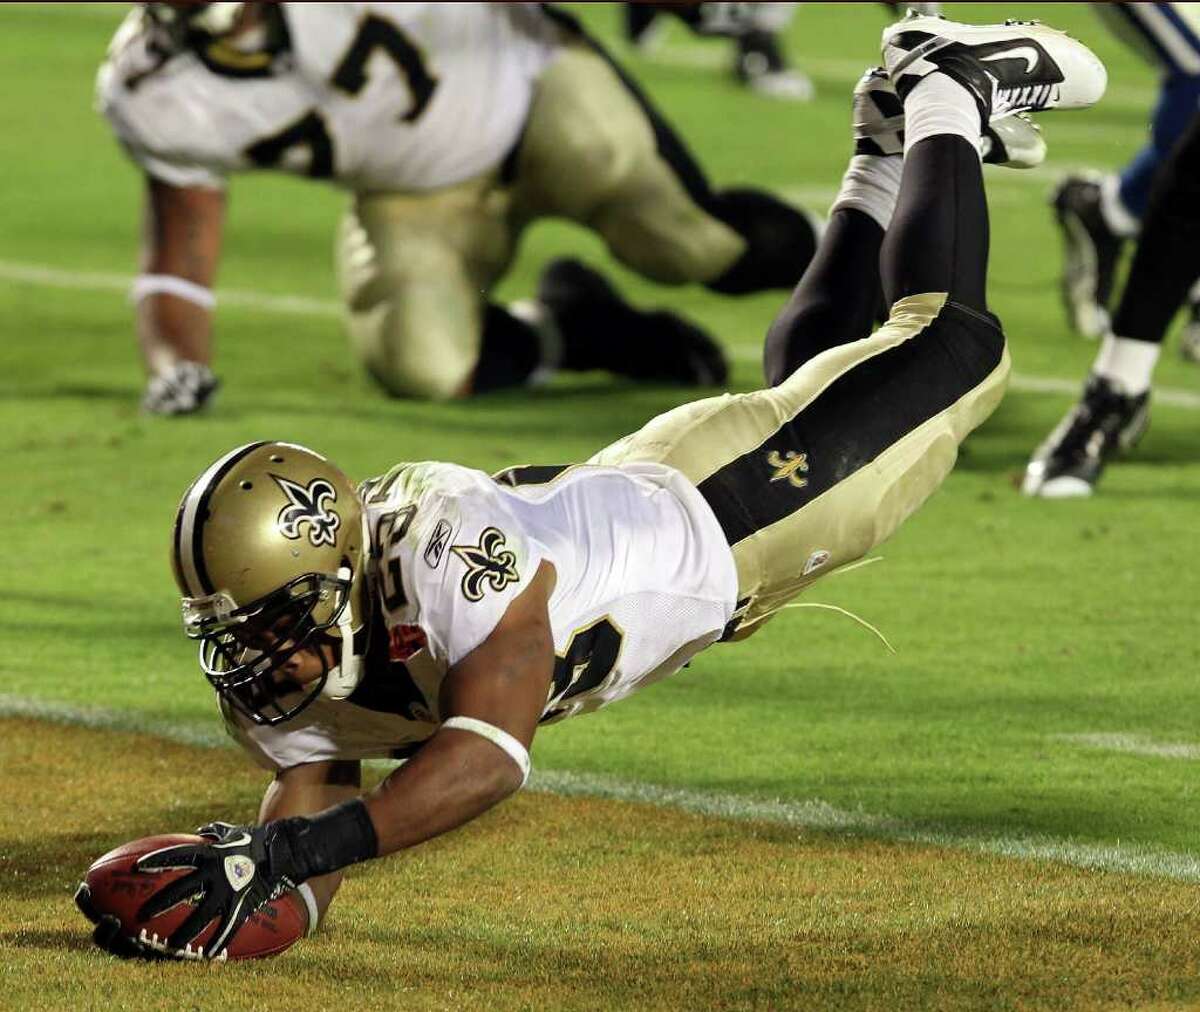 MIAMI GARDENS, FL - FEBRUARY 07: Pierre Thomas #23 of the New Orleans Saints leaps into the end zone to score a touchdown against of the Indianapolis Colts in the third quarter during Super Bowl XLIV on February 7, 2010 at Sun Life Stadium in Miami Gardens, Florida. (Photo by Elsa/Getty Images) *** Local Caption *** Pierre Thomas